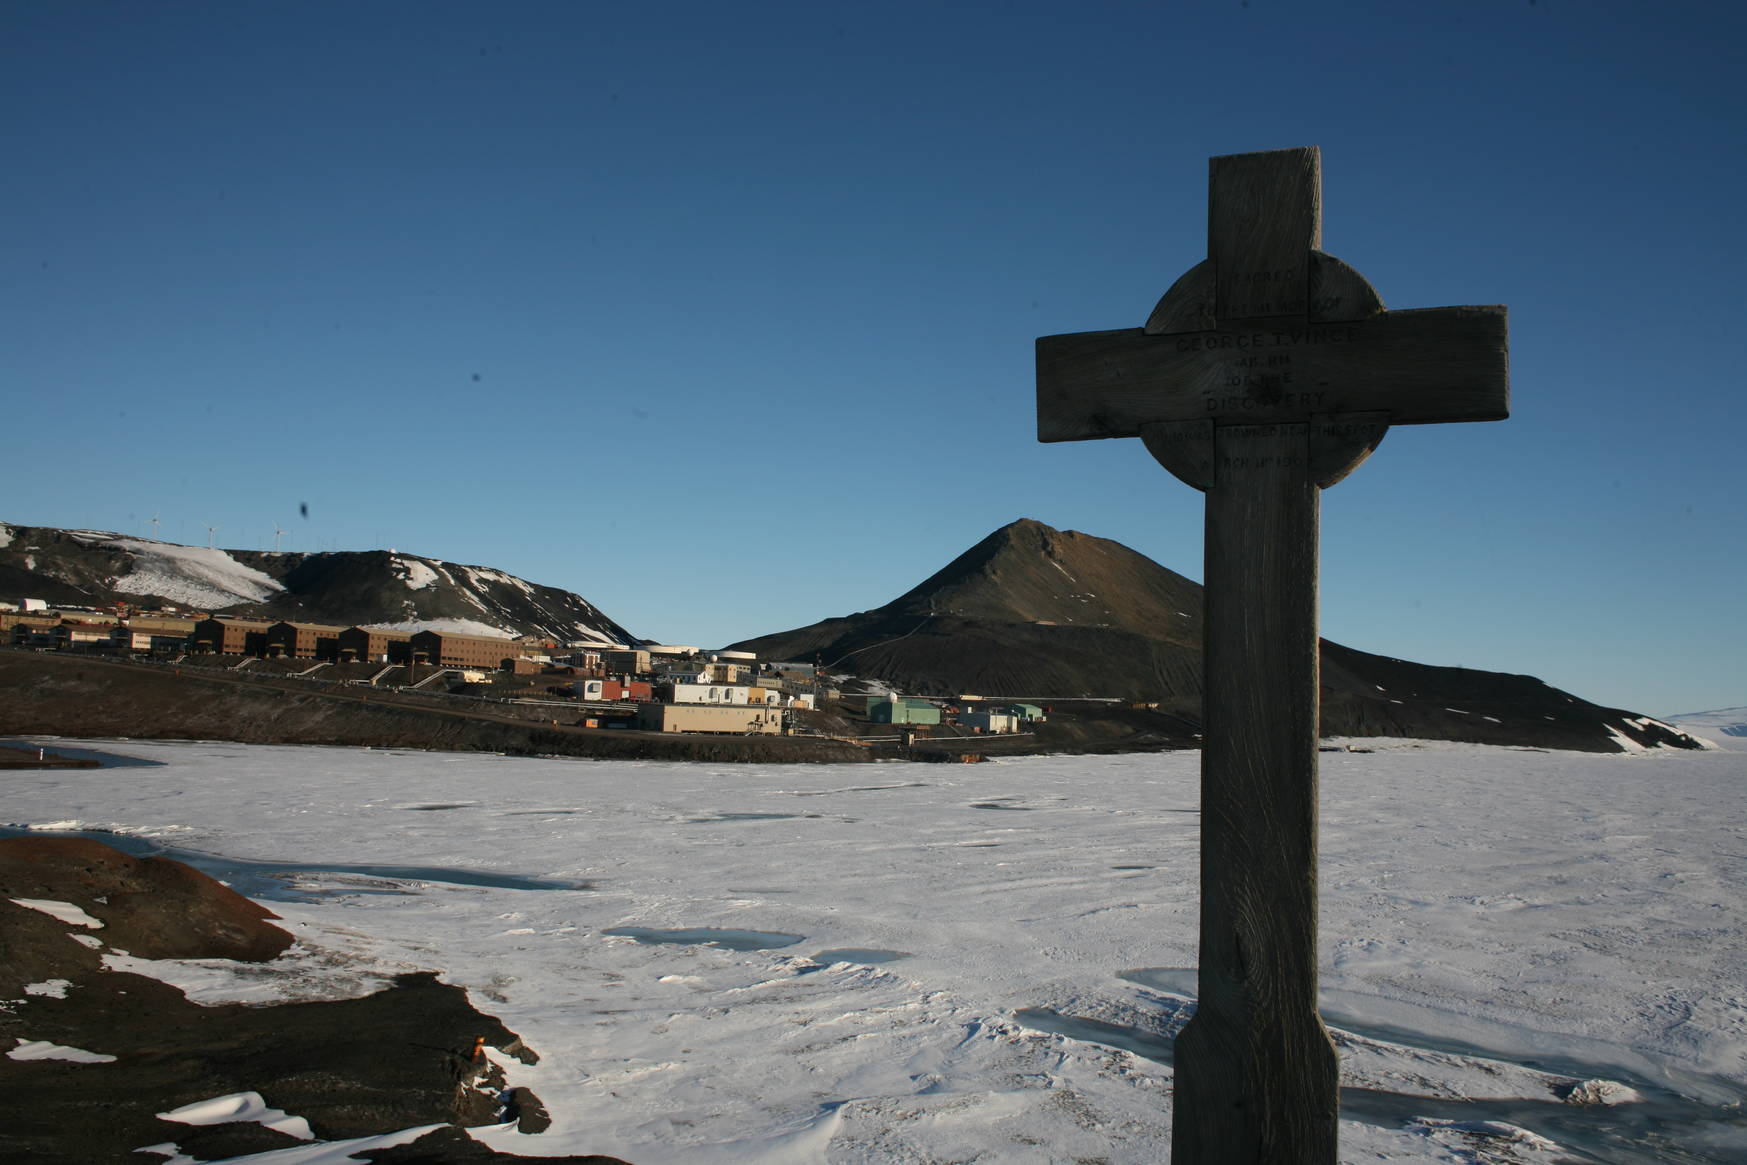 A view of the cross on top of the <em>Hut Point</em> hill. In the background the McMurdo base and the <em>Observation Hill</em>, my next hiking goal.